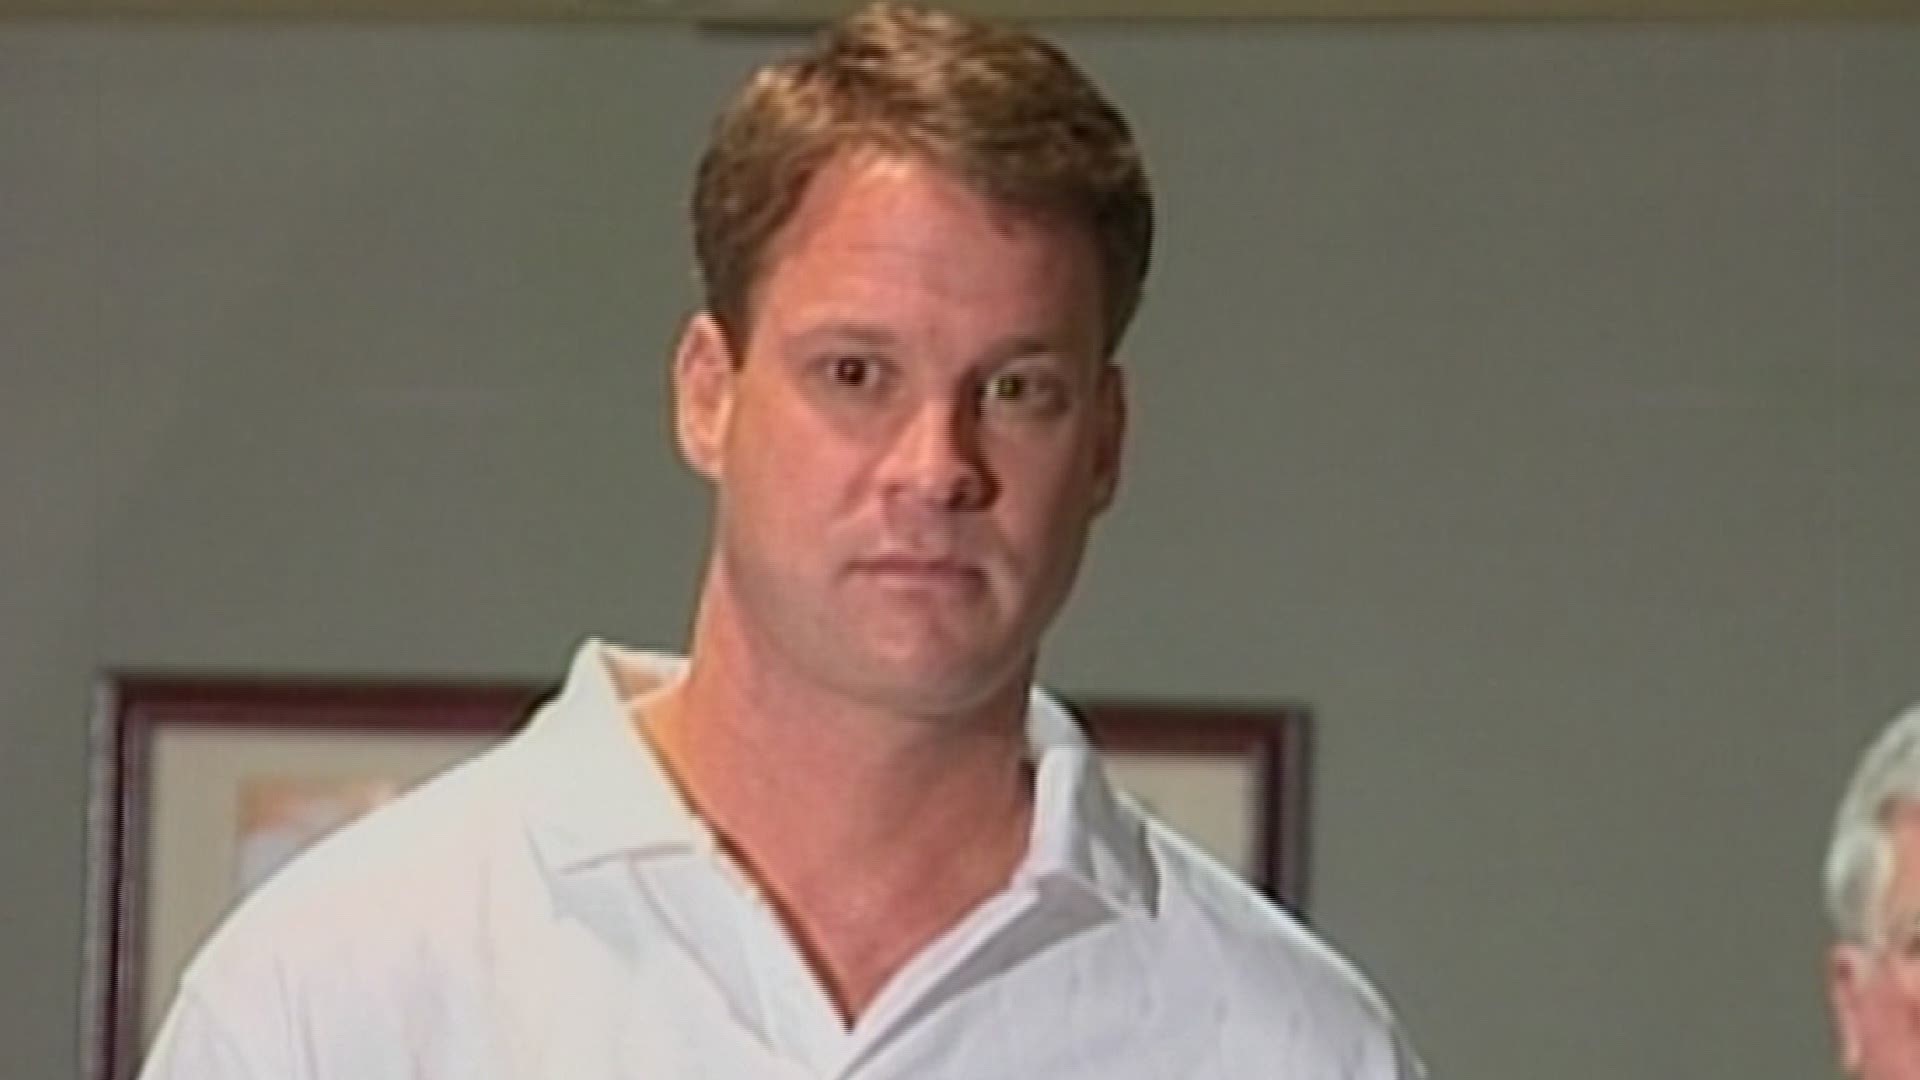 In 2010, Tennessee head football coach Lane Kiffin announced he would leave the University to coach Southern California.